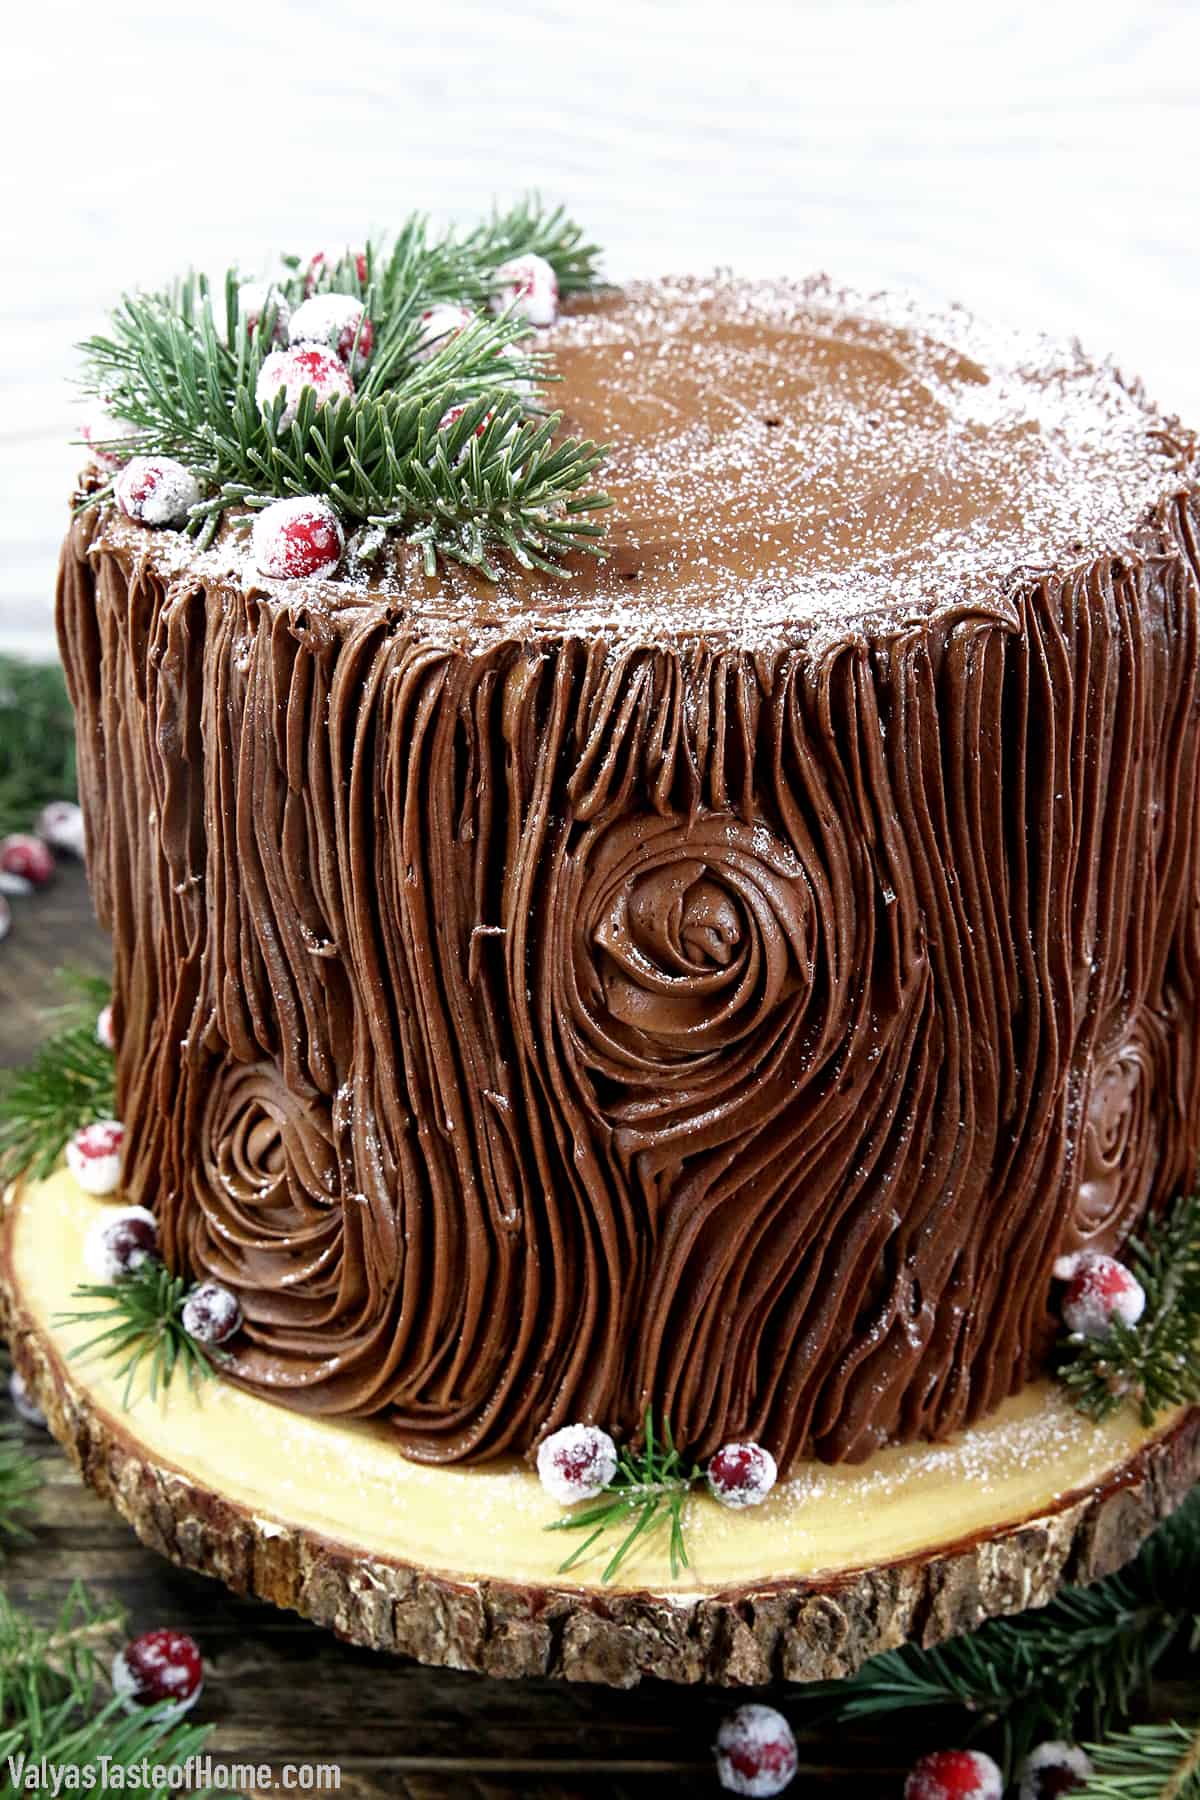 The Best Tree Stump Cake dessert, with its irresistible chocolate buttercream frosting and the beauty of a true show stopper. It's perfect for Christmas, any holiday, or a woodland theme party.